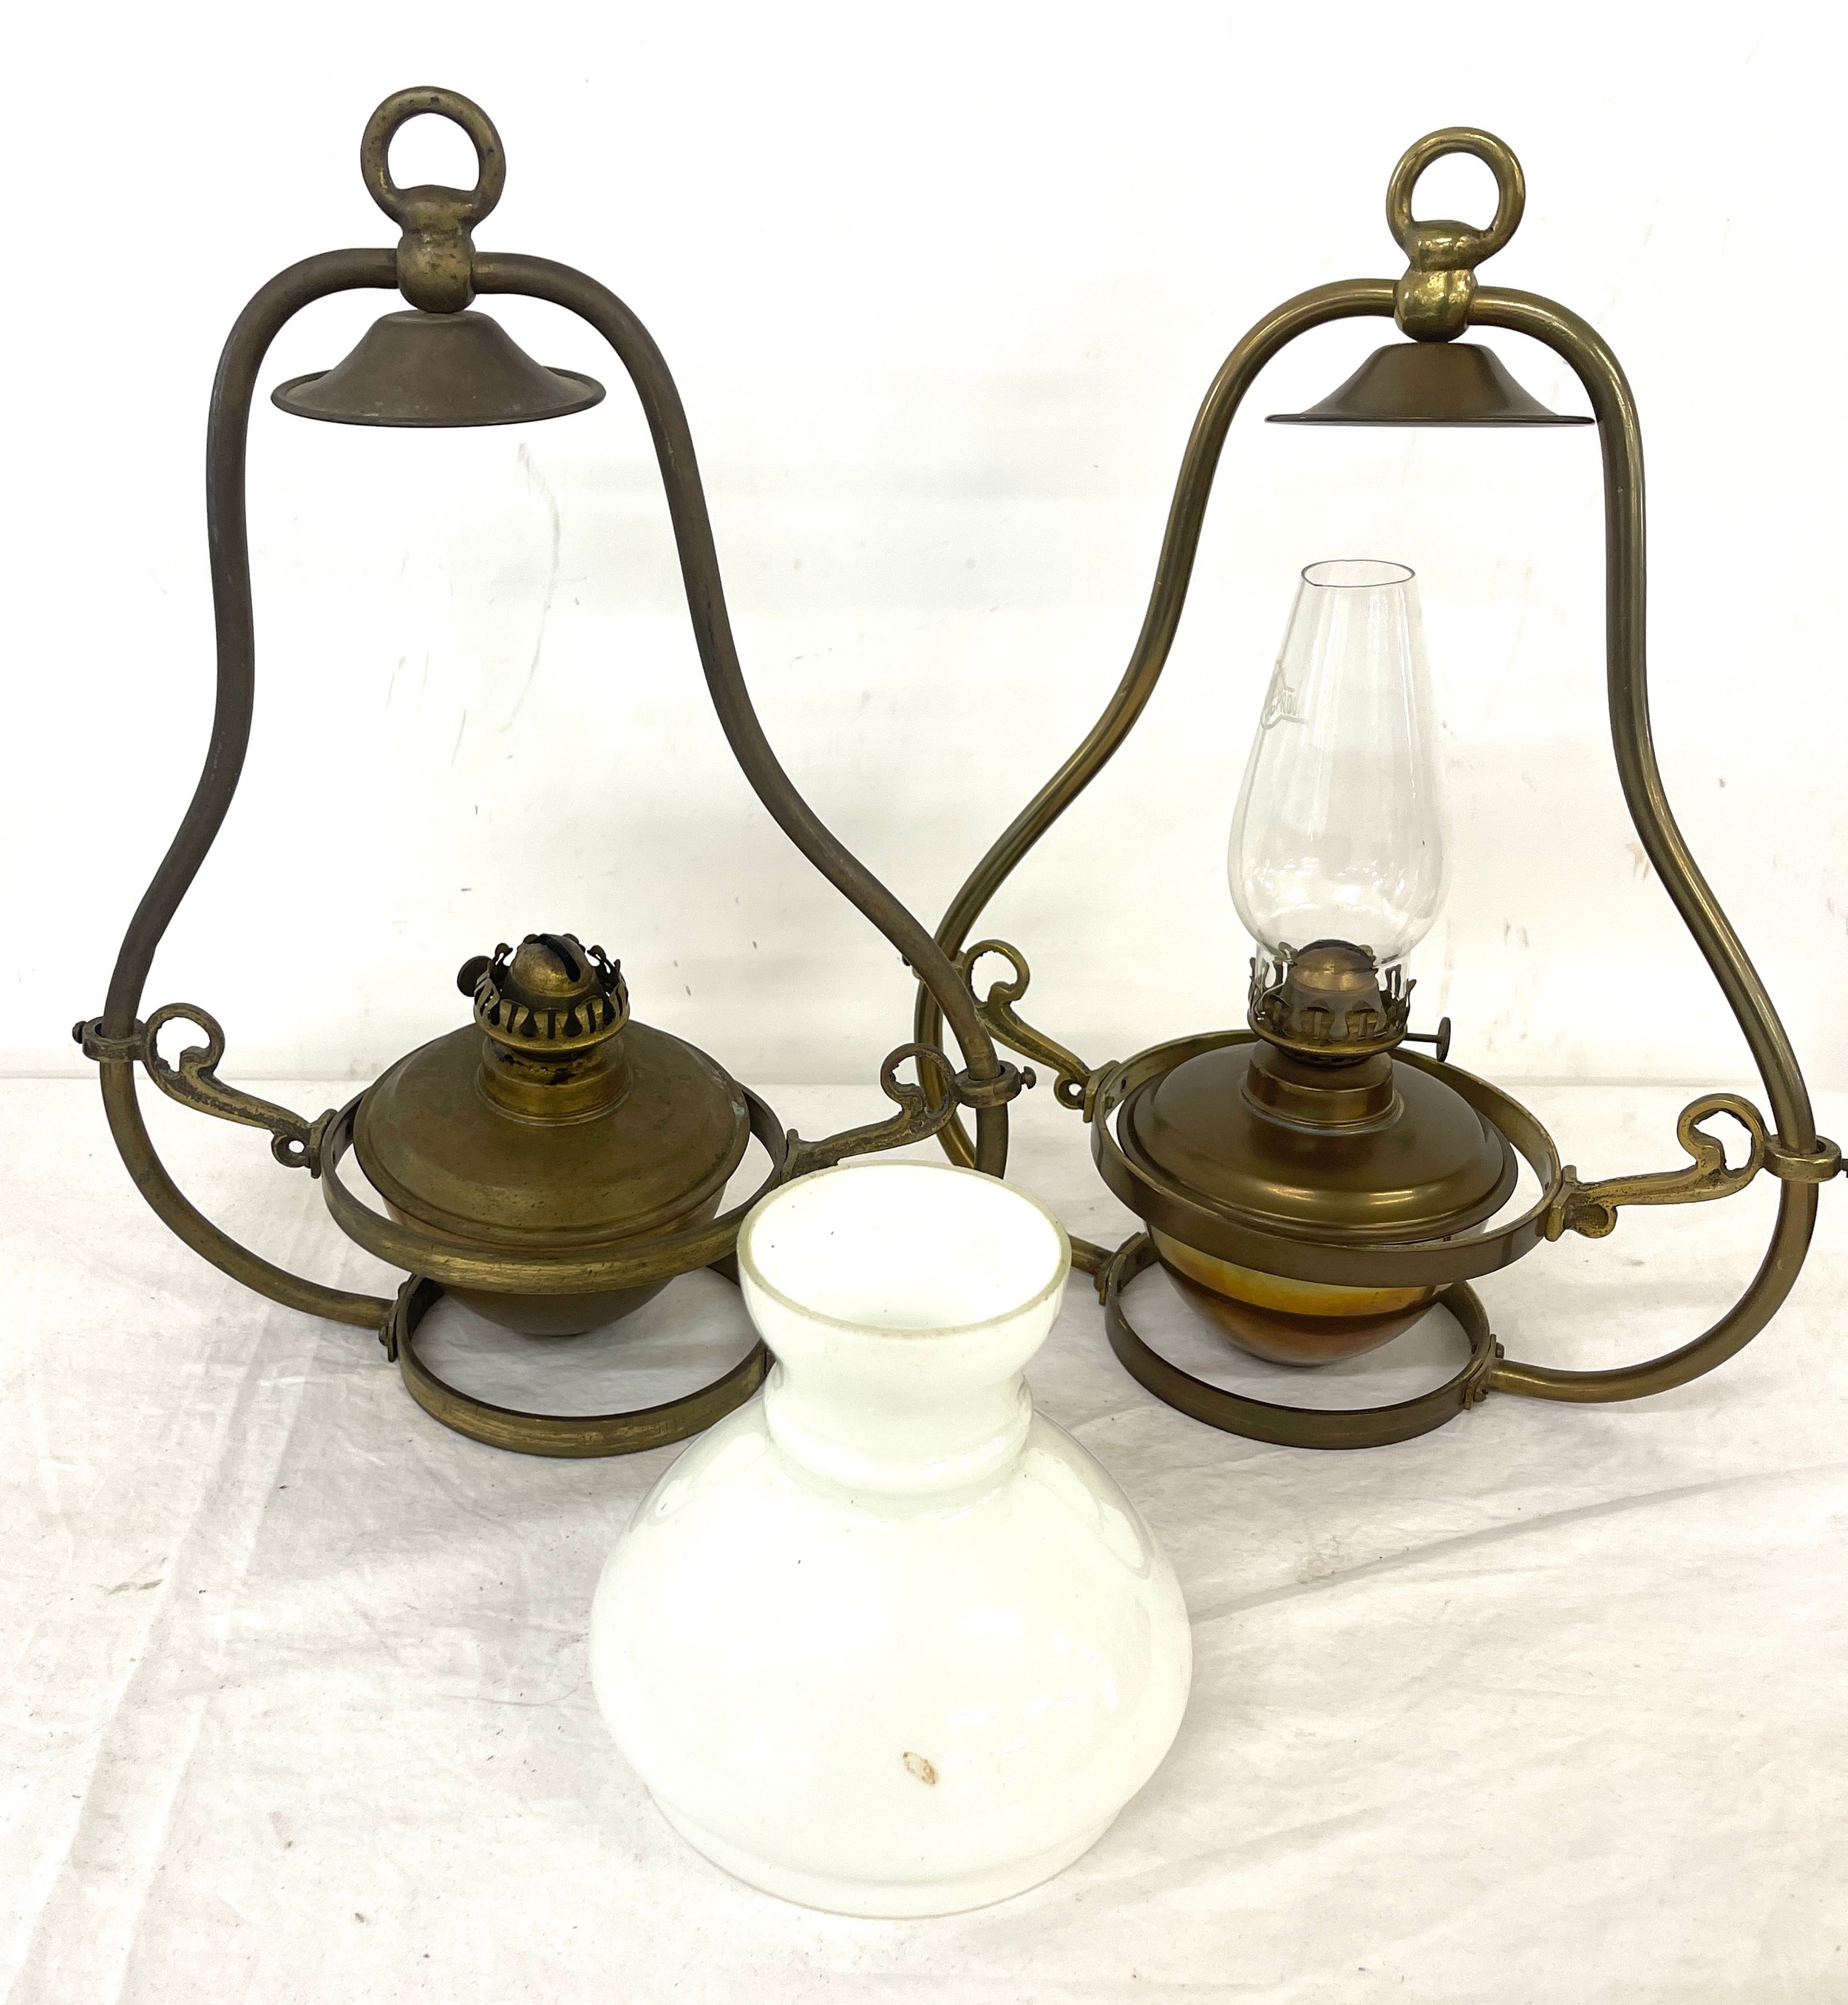 Pair hanging oil lamps, one has a funnel and shade